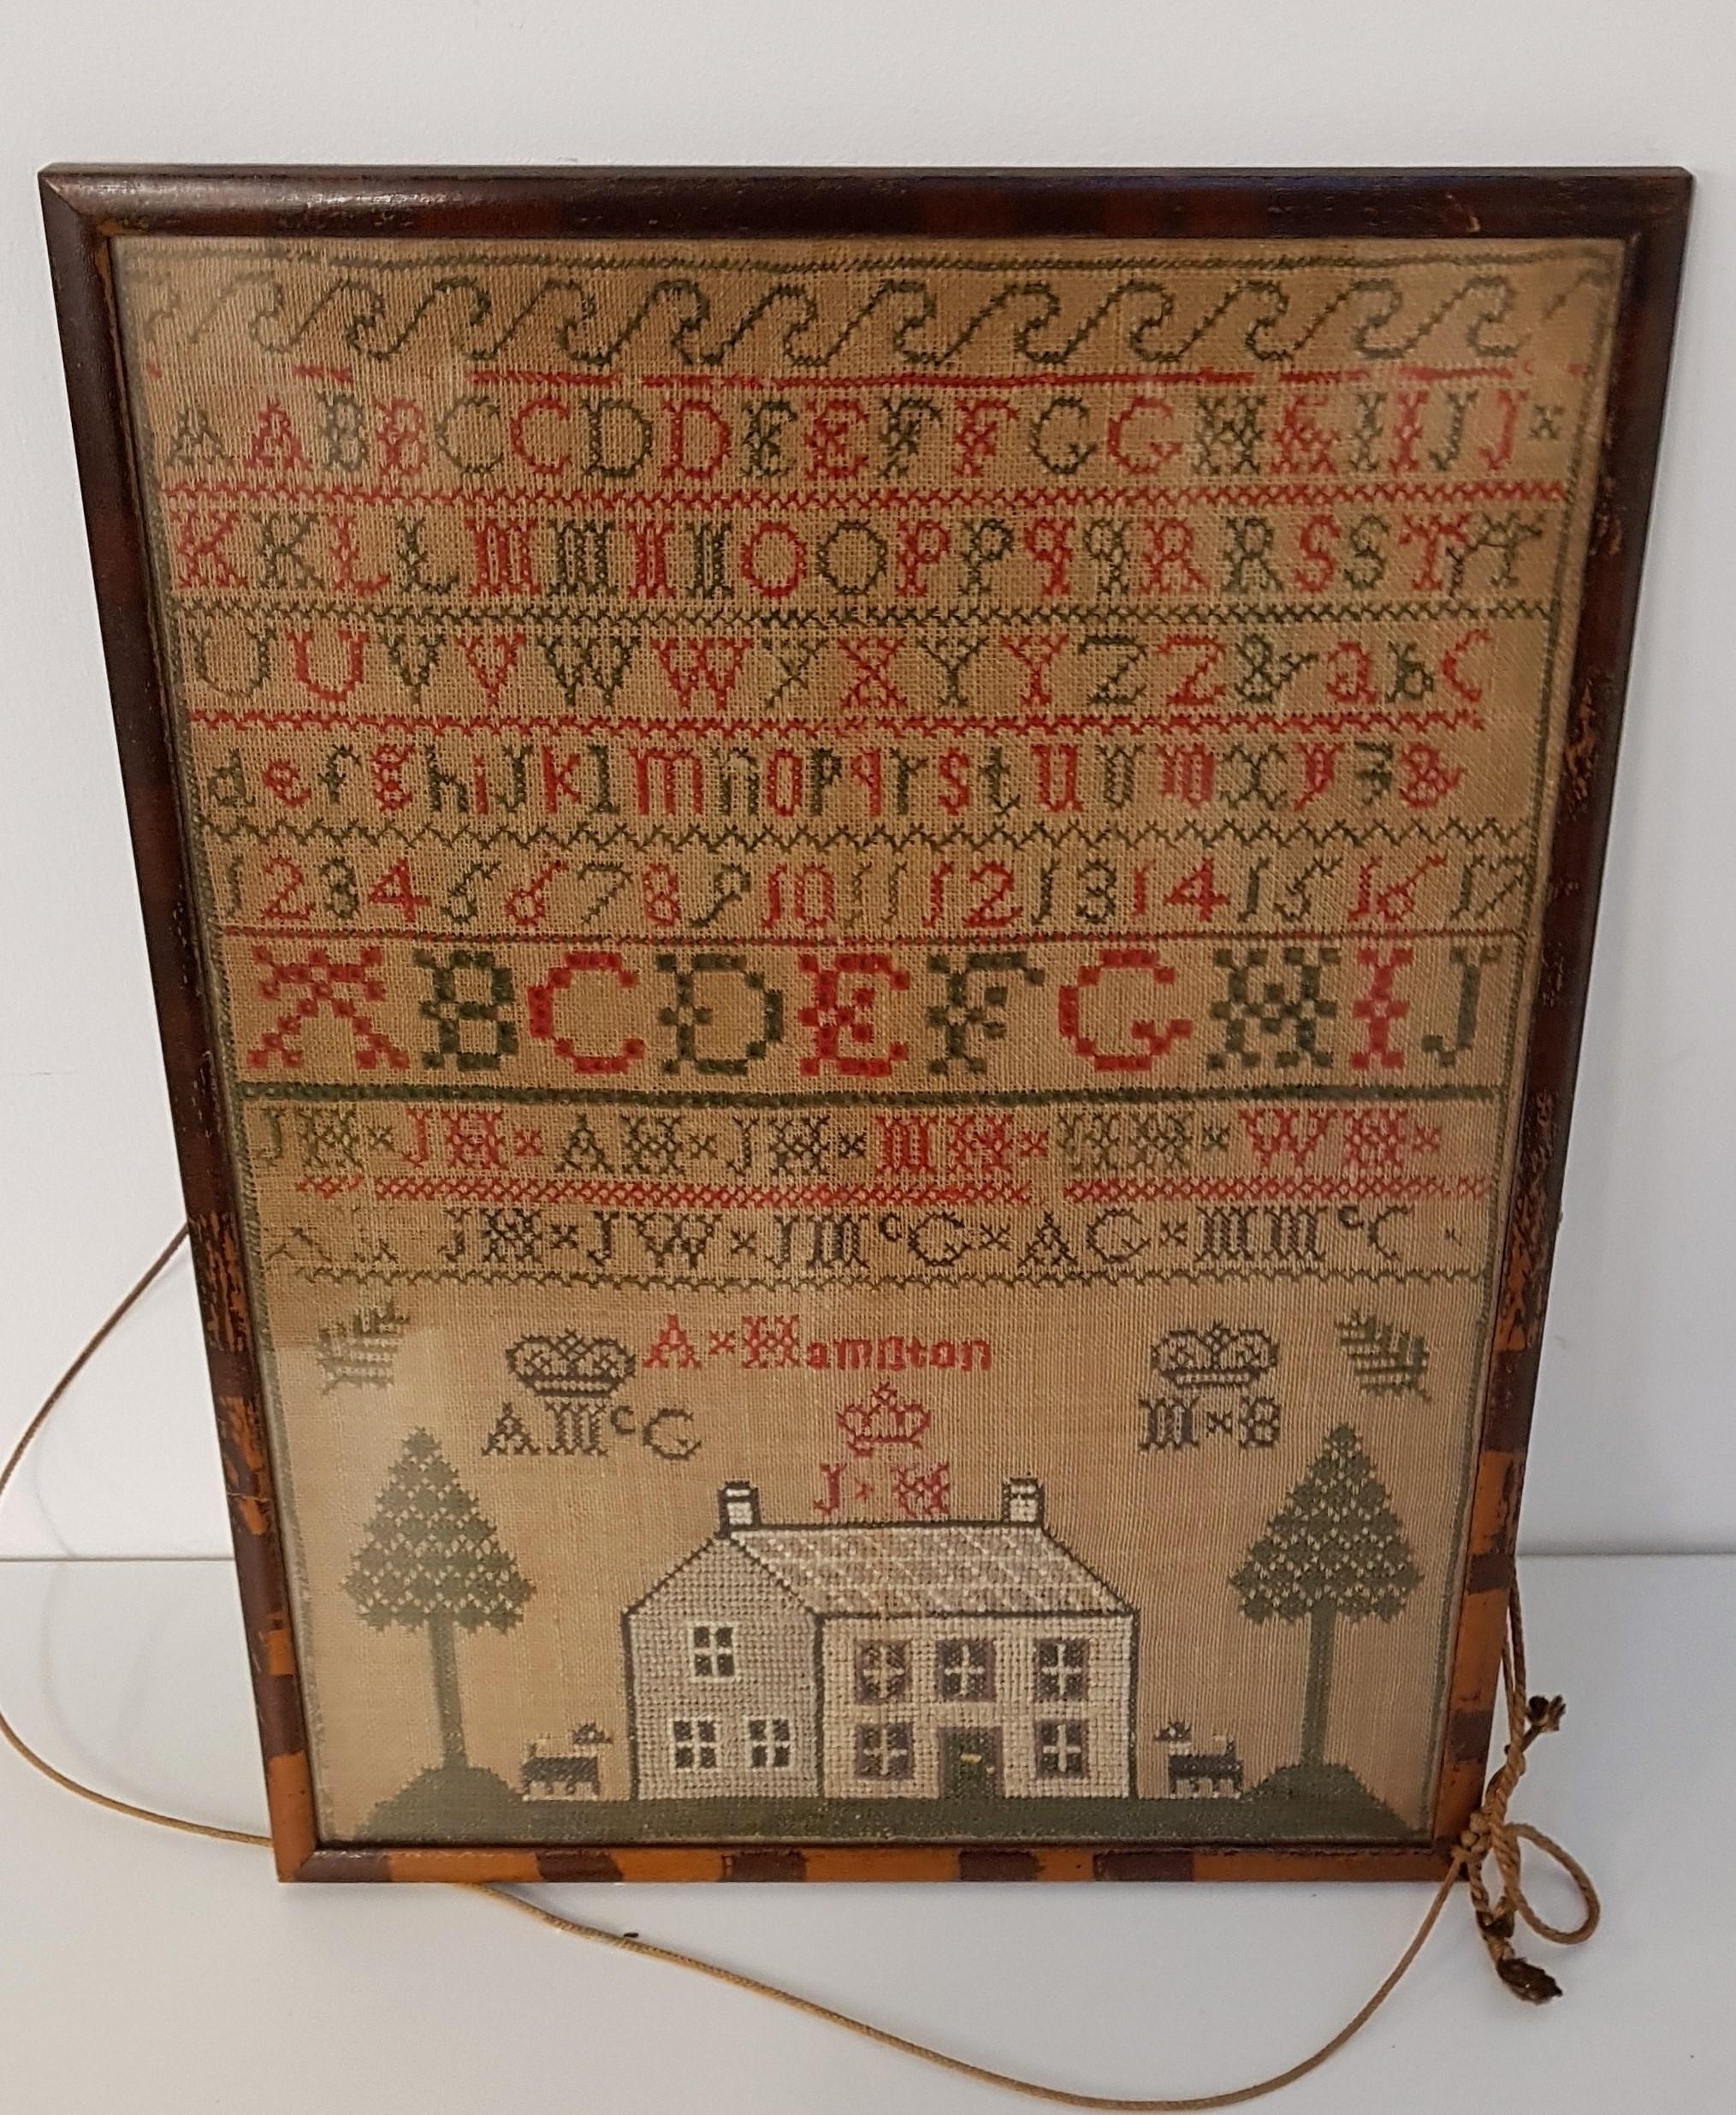 VICTORIAN SCOTTISH SAMPLER by A. Hampton with rows of alphanumeric in red and green thread, above